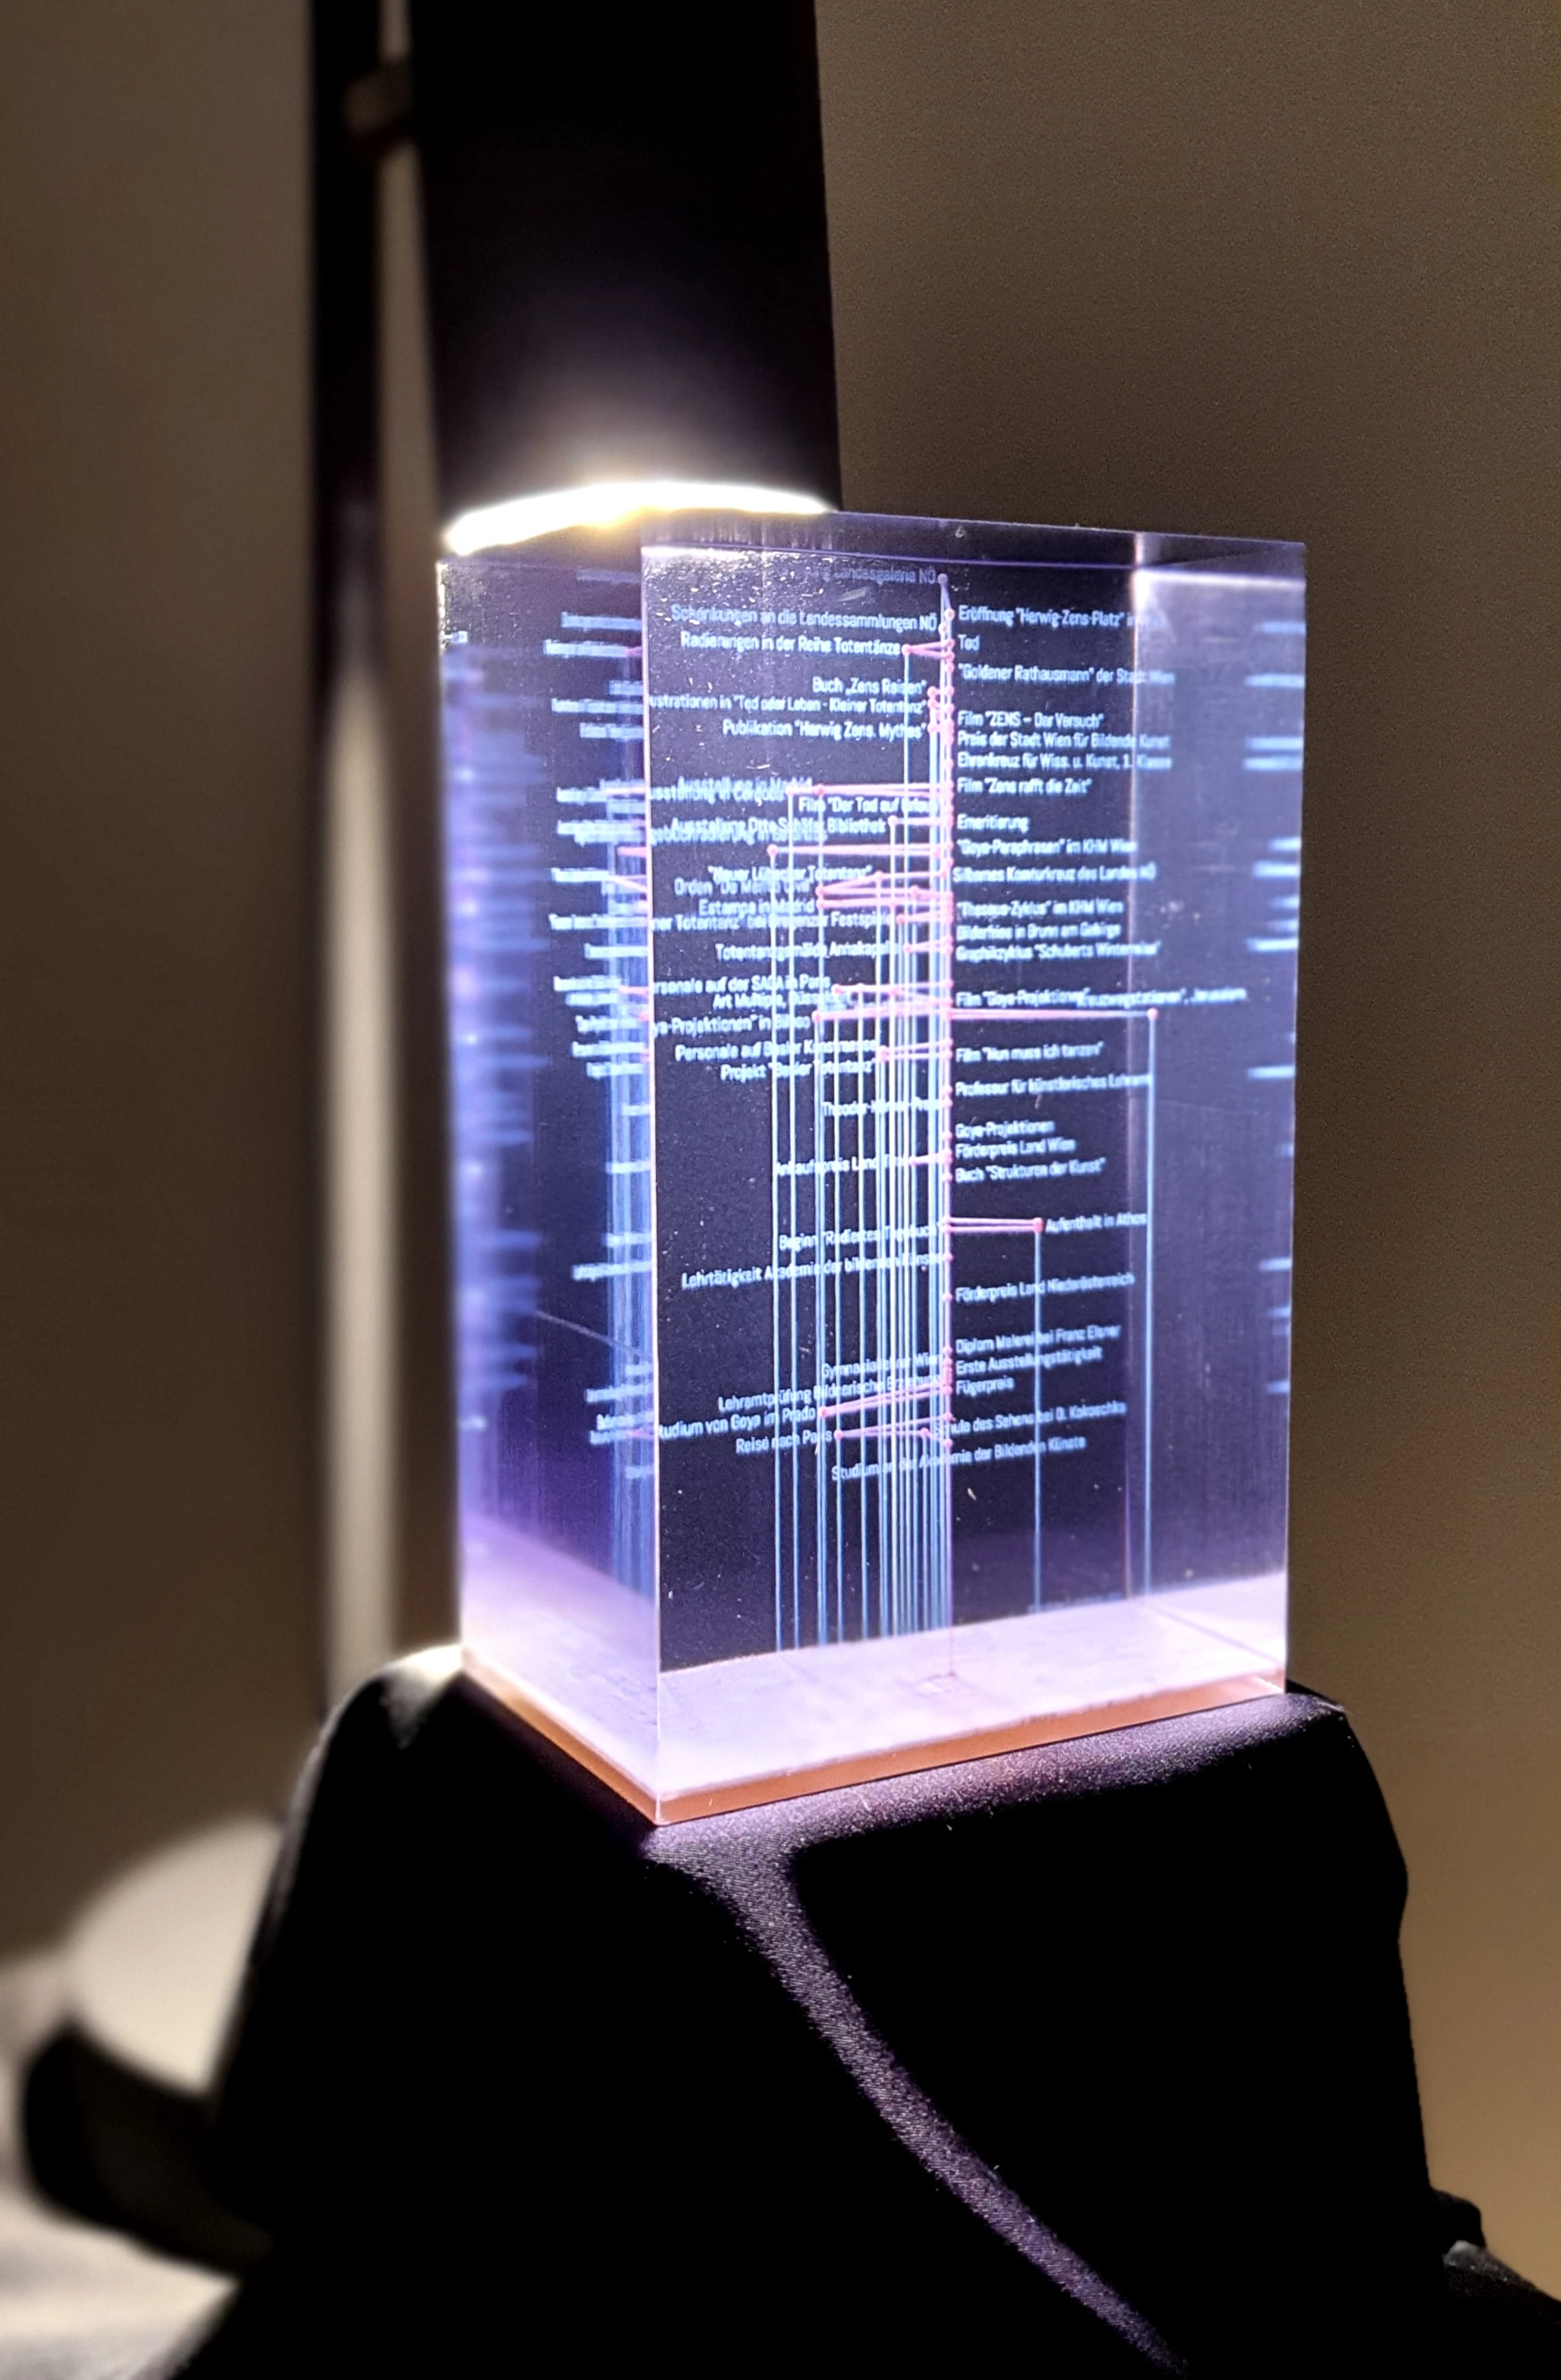 Biographical data sculpture of the live of Herwig Zens, set up at the Museum of Art History, Vienna.